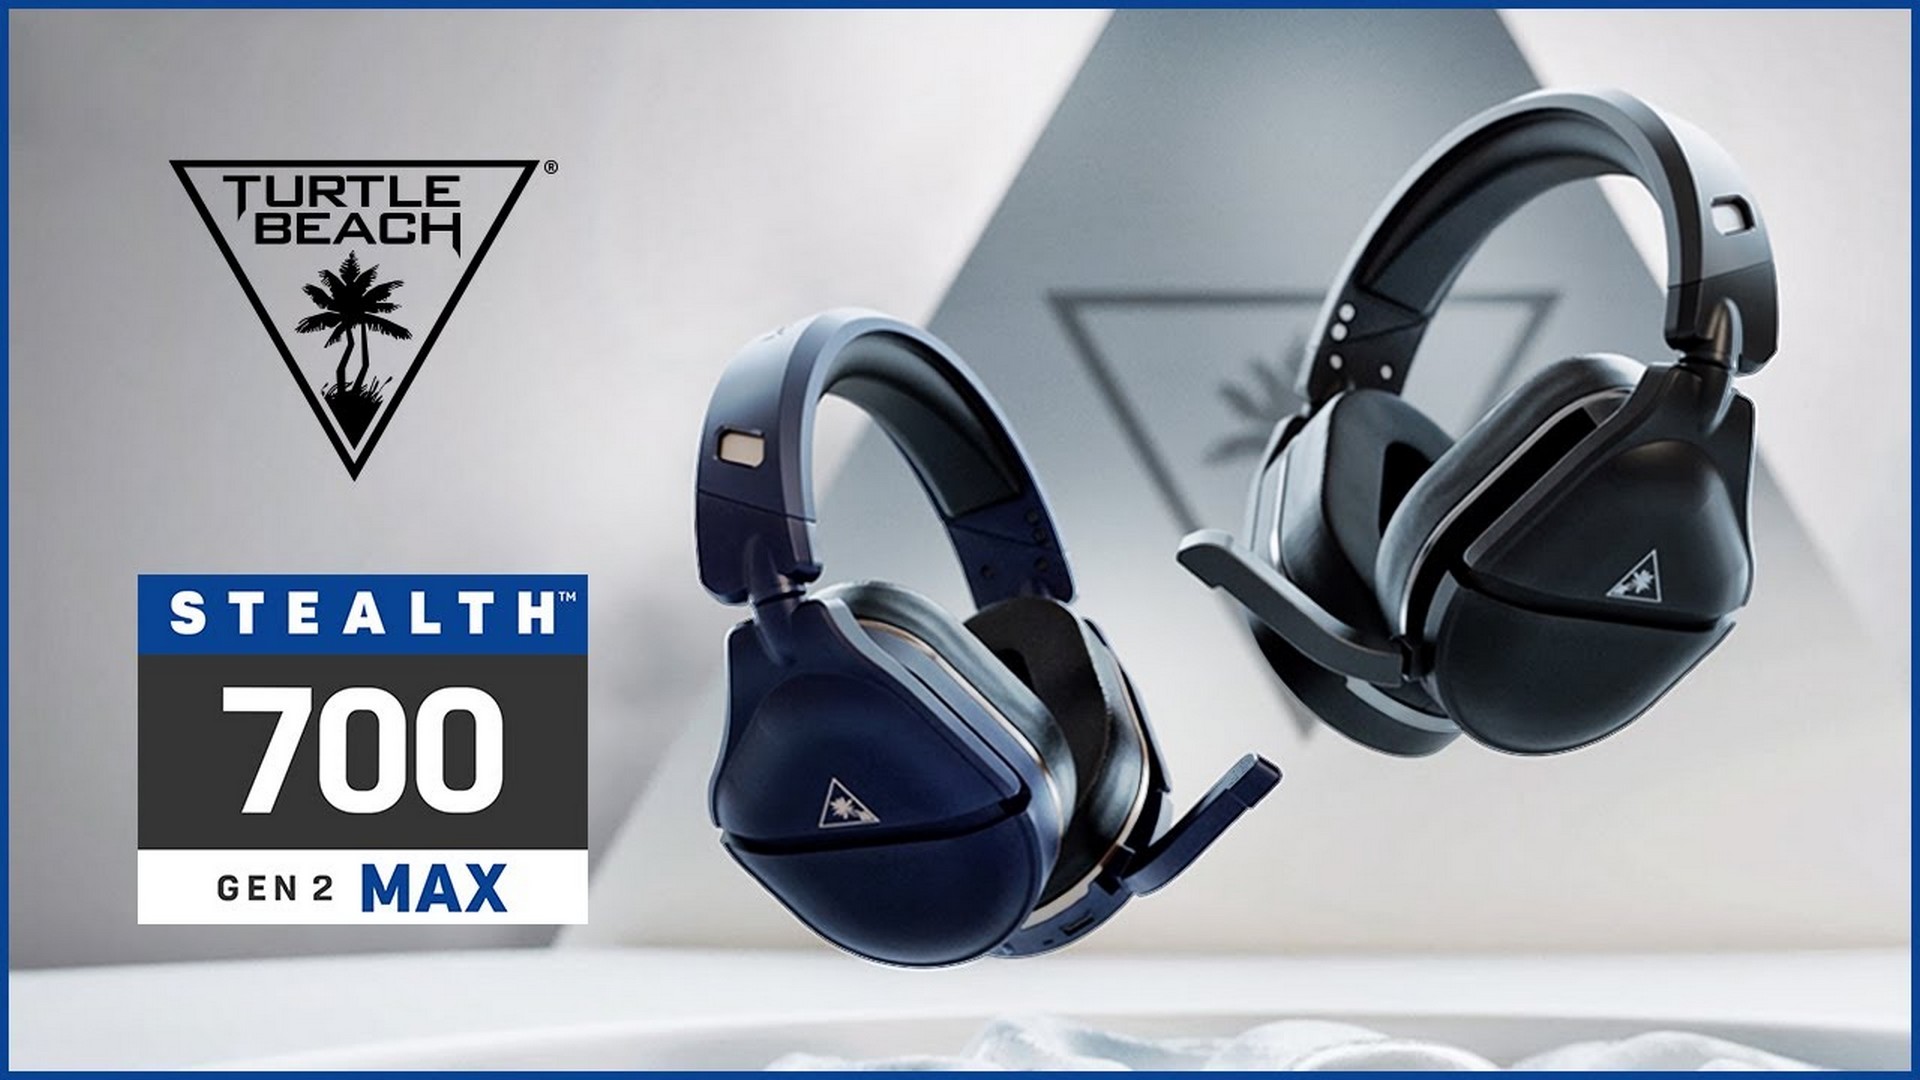 Turtle Beach’s Award-Winning Stealth 700 GEN 2 MAX Premium Wireless Gaming Headset For Playstation Is Now Available In Australia